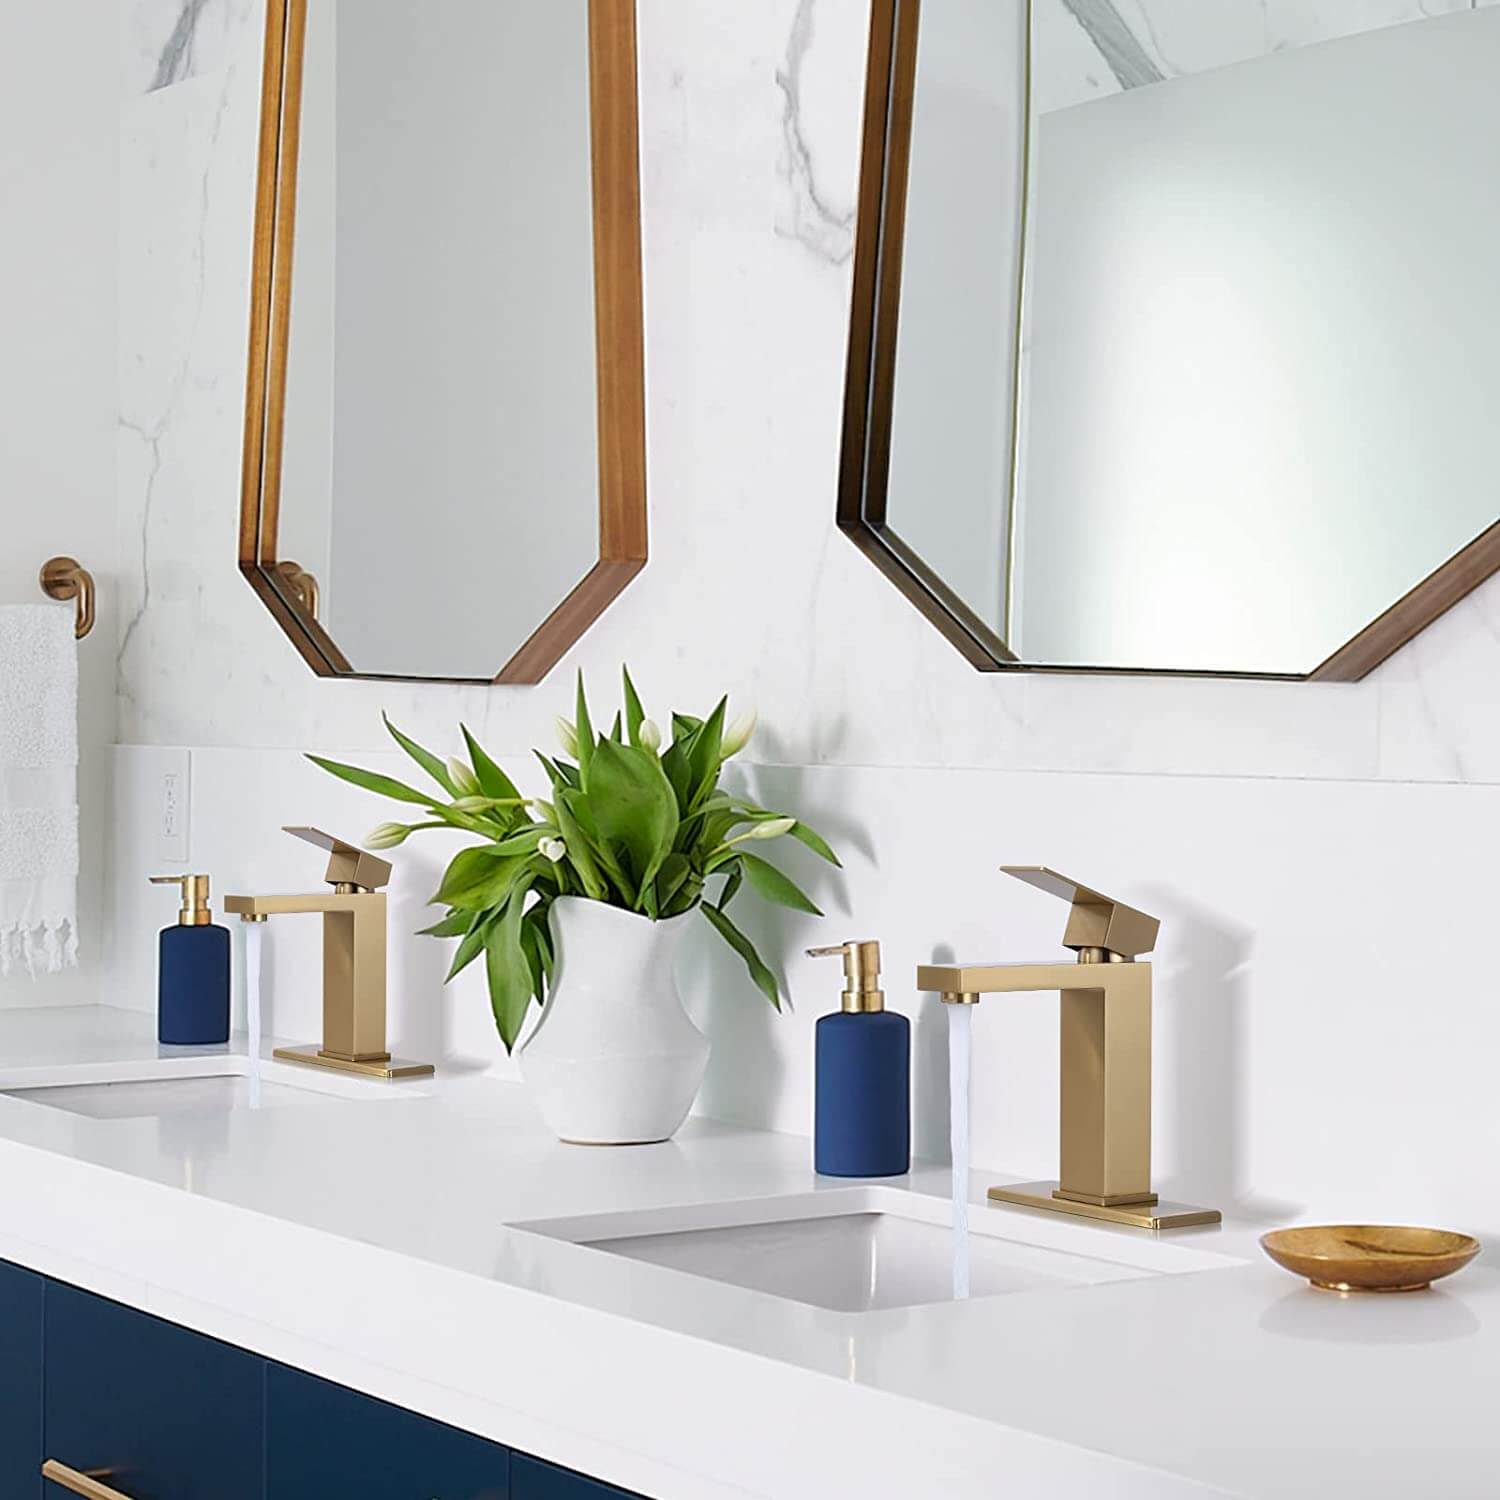 How to Choose Ultra Modern Bathroom Faucets ? - Blog - 2